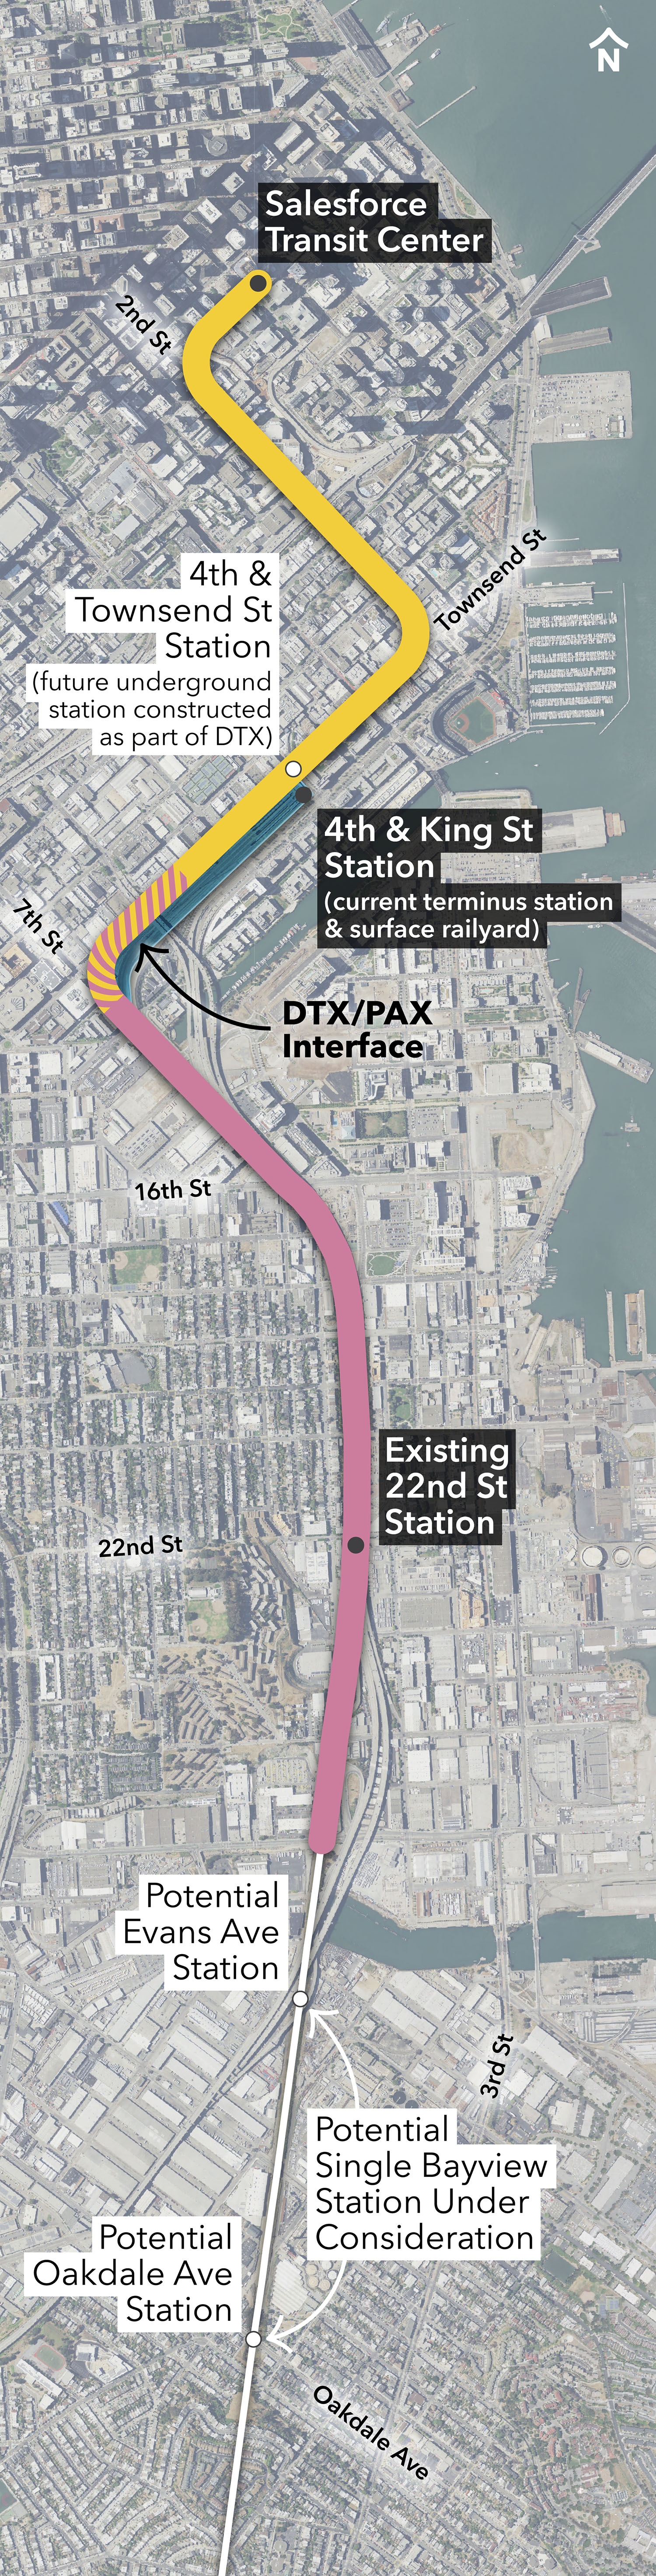 Map showing the Pennsylvania Avenue Extension project area from Cesar Chavez to the DTX/PAX Interface at the current Caltrain yard. The DTX project area continues North along Townsend to 2nd Street and the Salesforce Transit Center. Potential future stations are shown at 4th & Townsend (replacing the current 4th & King station) and 22nd Street (replacing the current 22nd Street station). The map also shows a potential Bayview Station at either Evans Avenue or Oakdale Avenue.